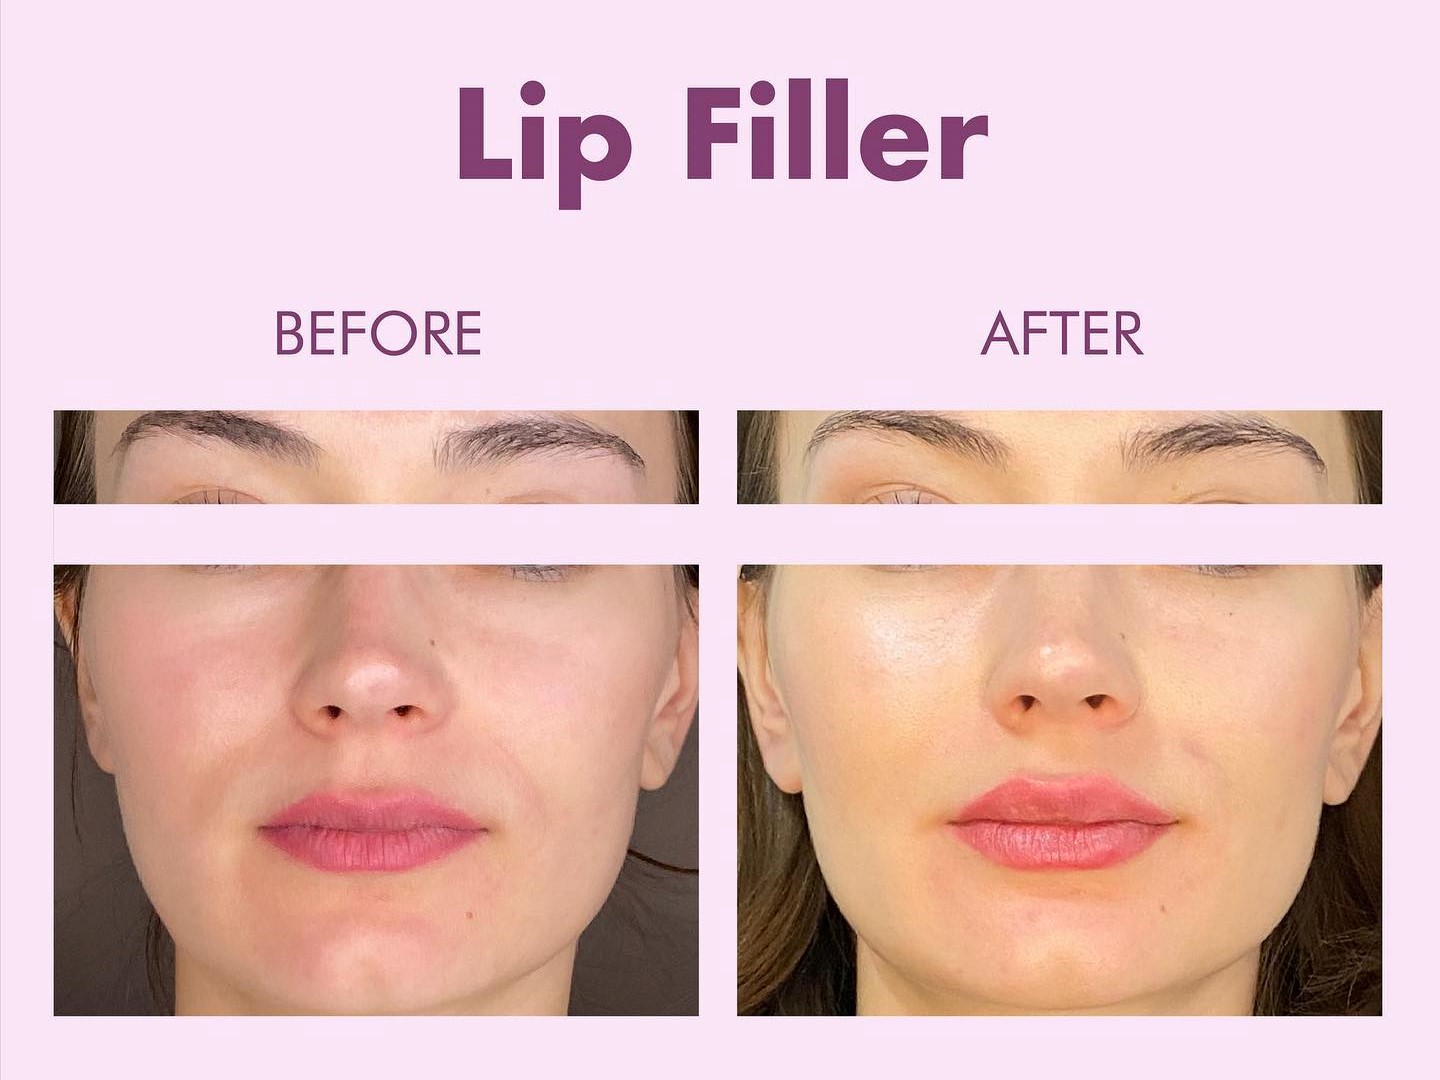 Lip Filler - Before and After pictures from a patient